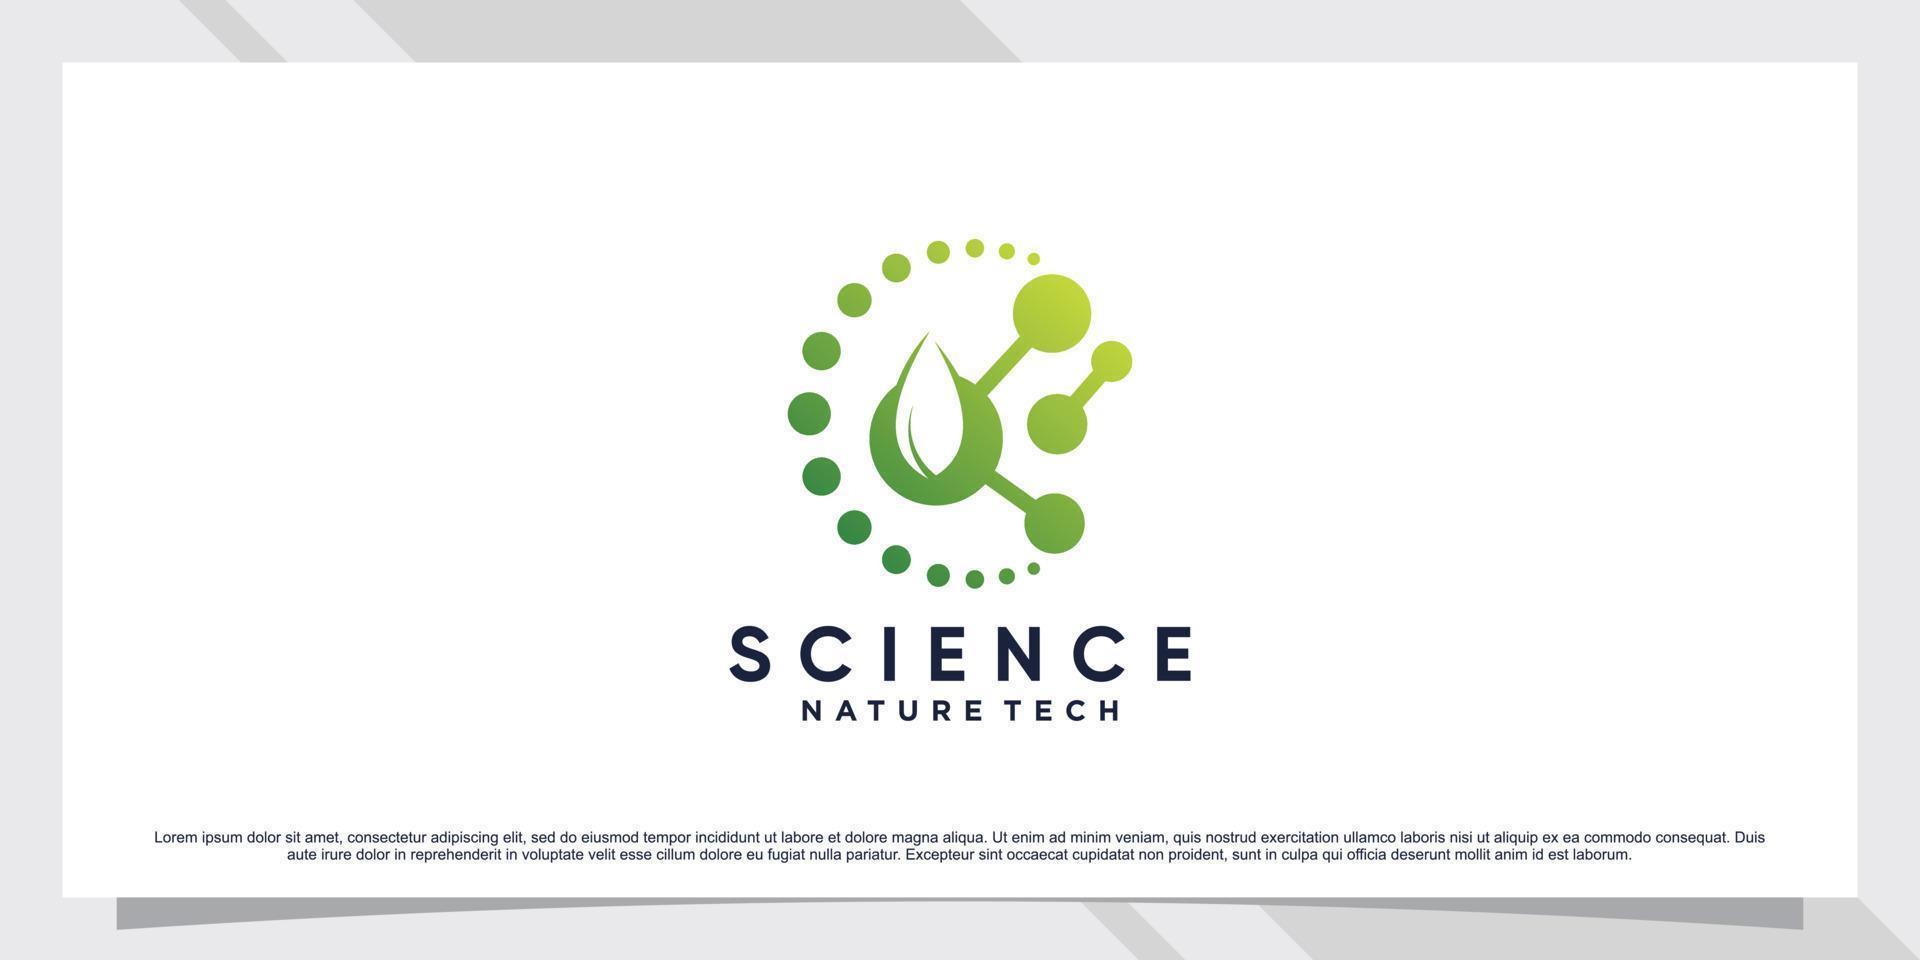 Science molecule logo design for technology with leaf and shape concept vector